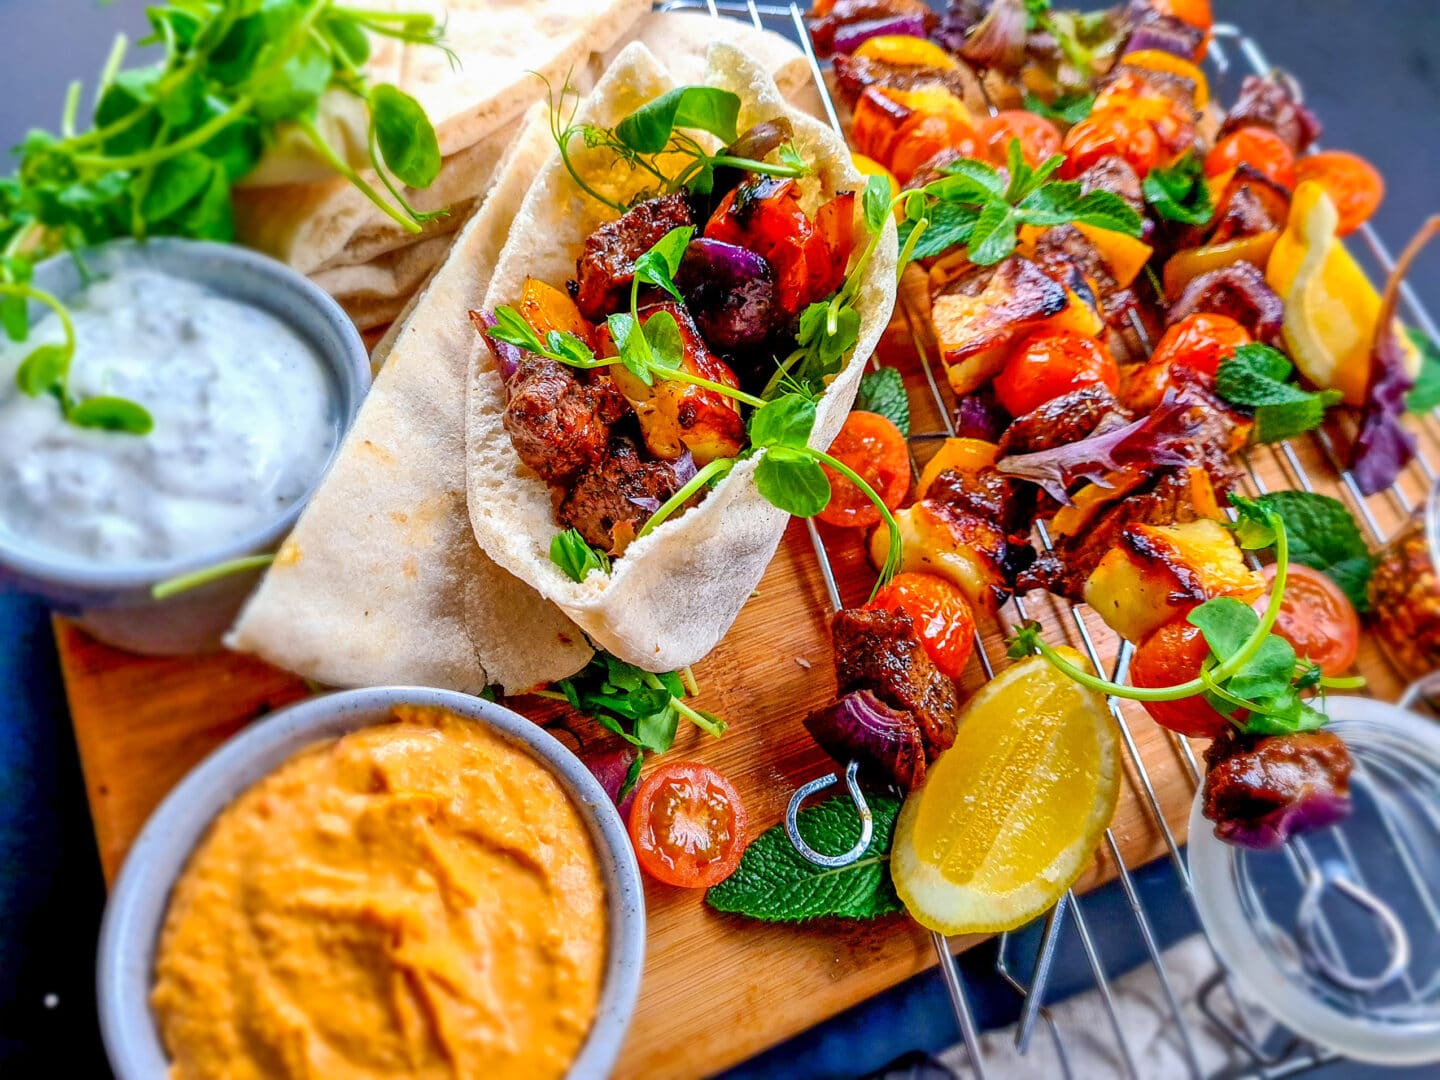 Minted lamb and halloumi kebabs laid out and served with pitta bread